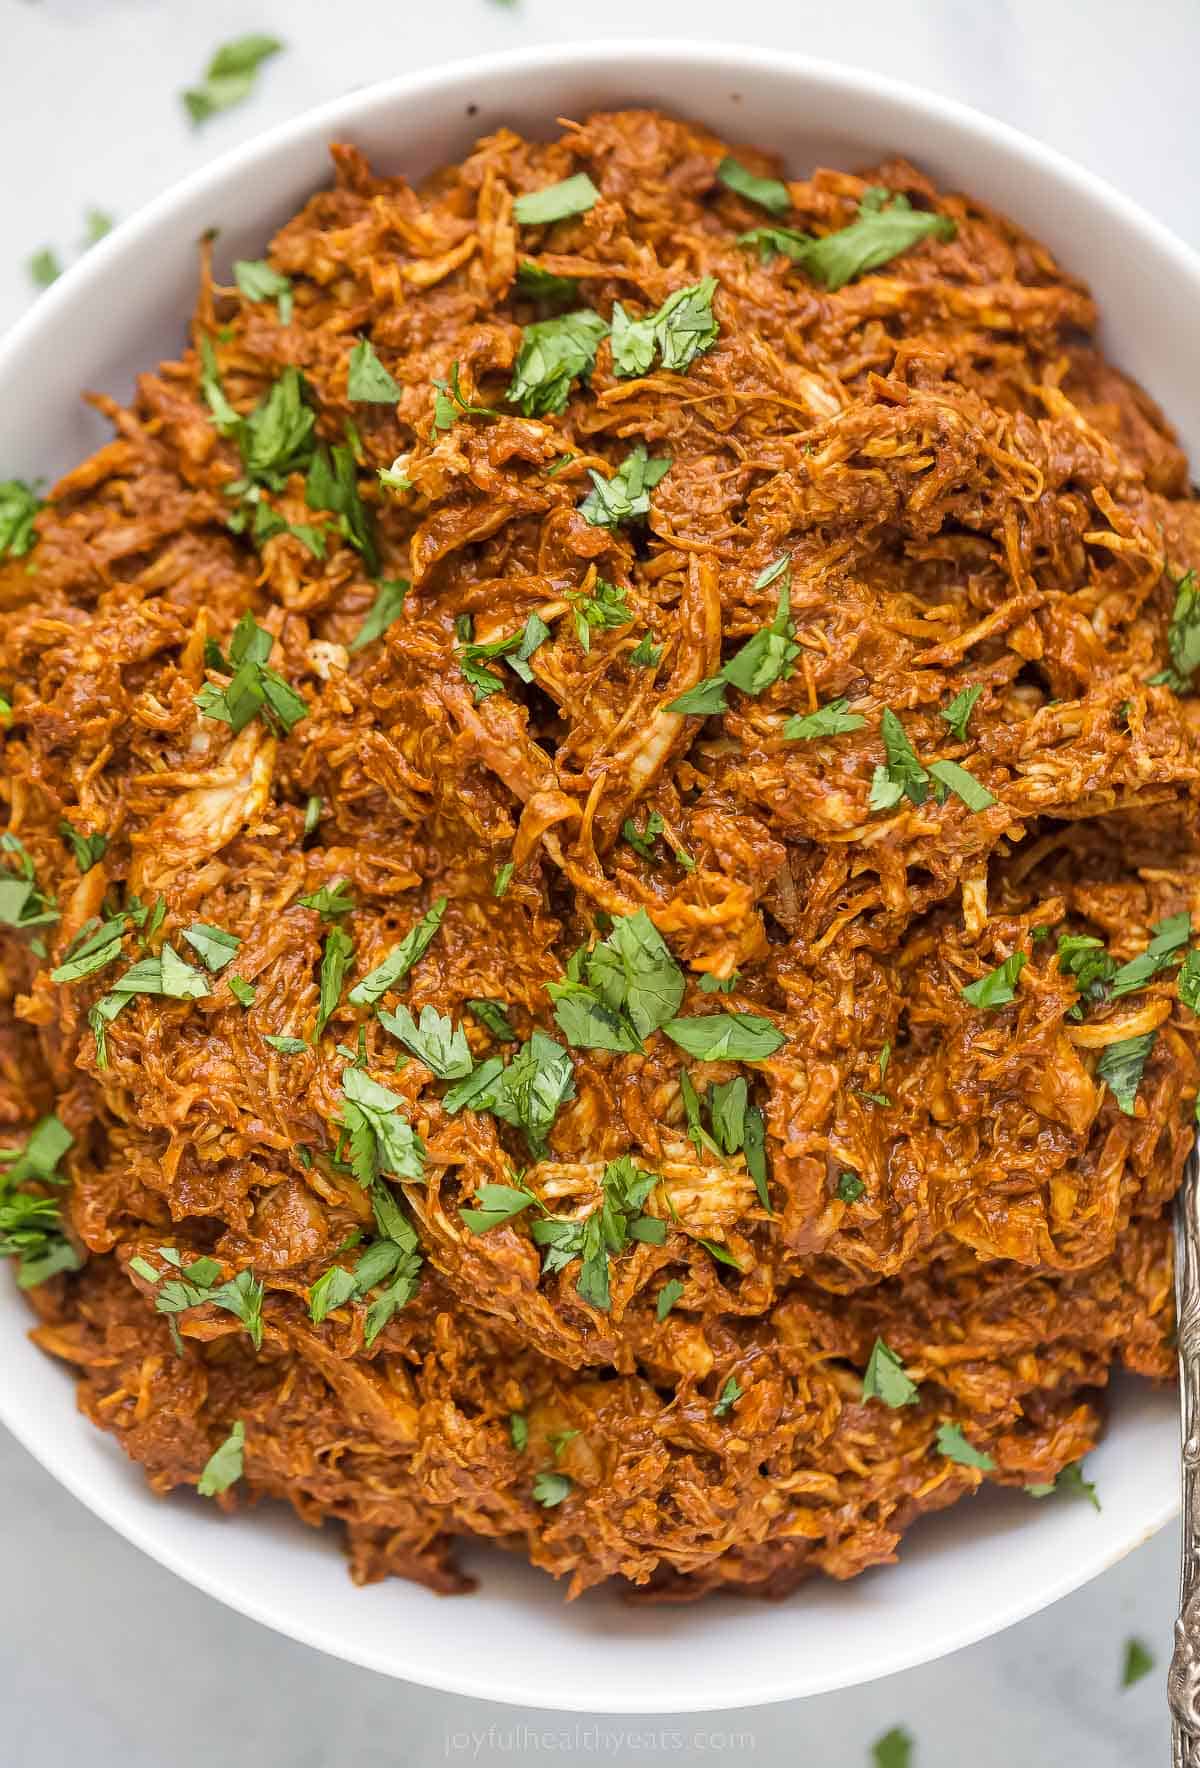 shredded chicken tossed in a dark red mole sauce topped with fresh herbs